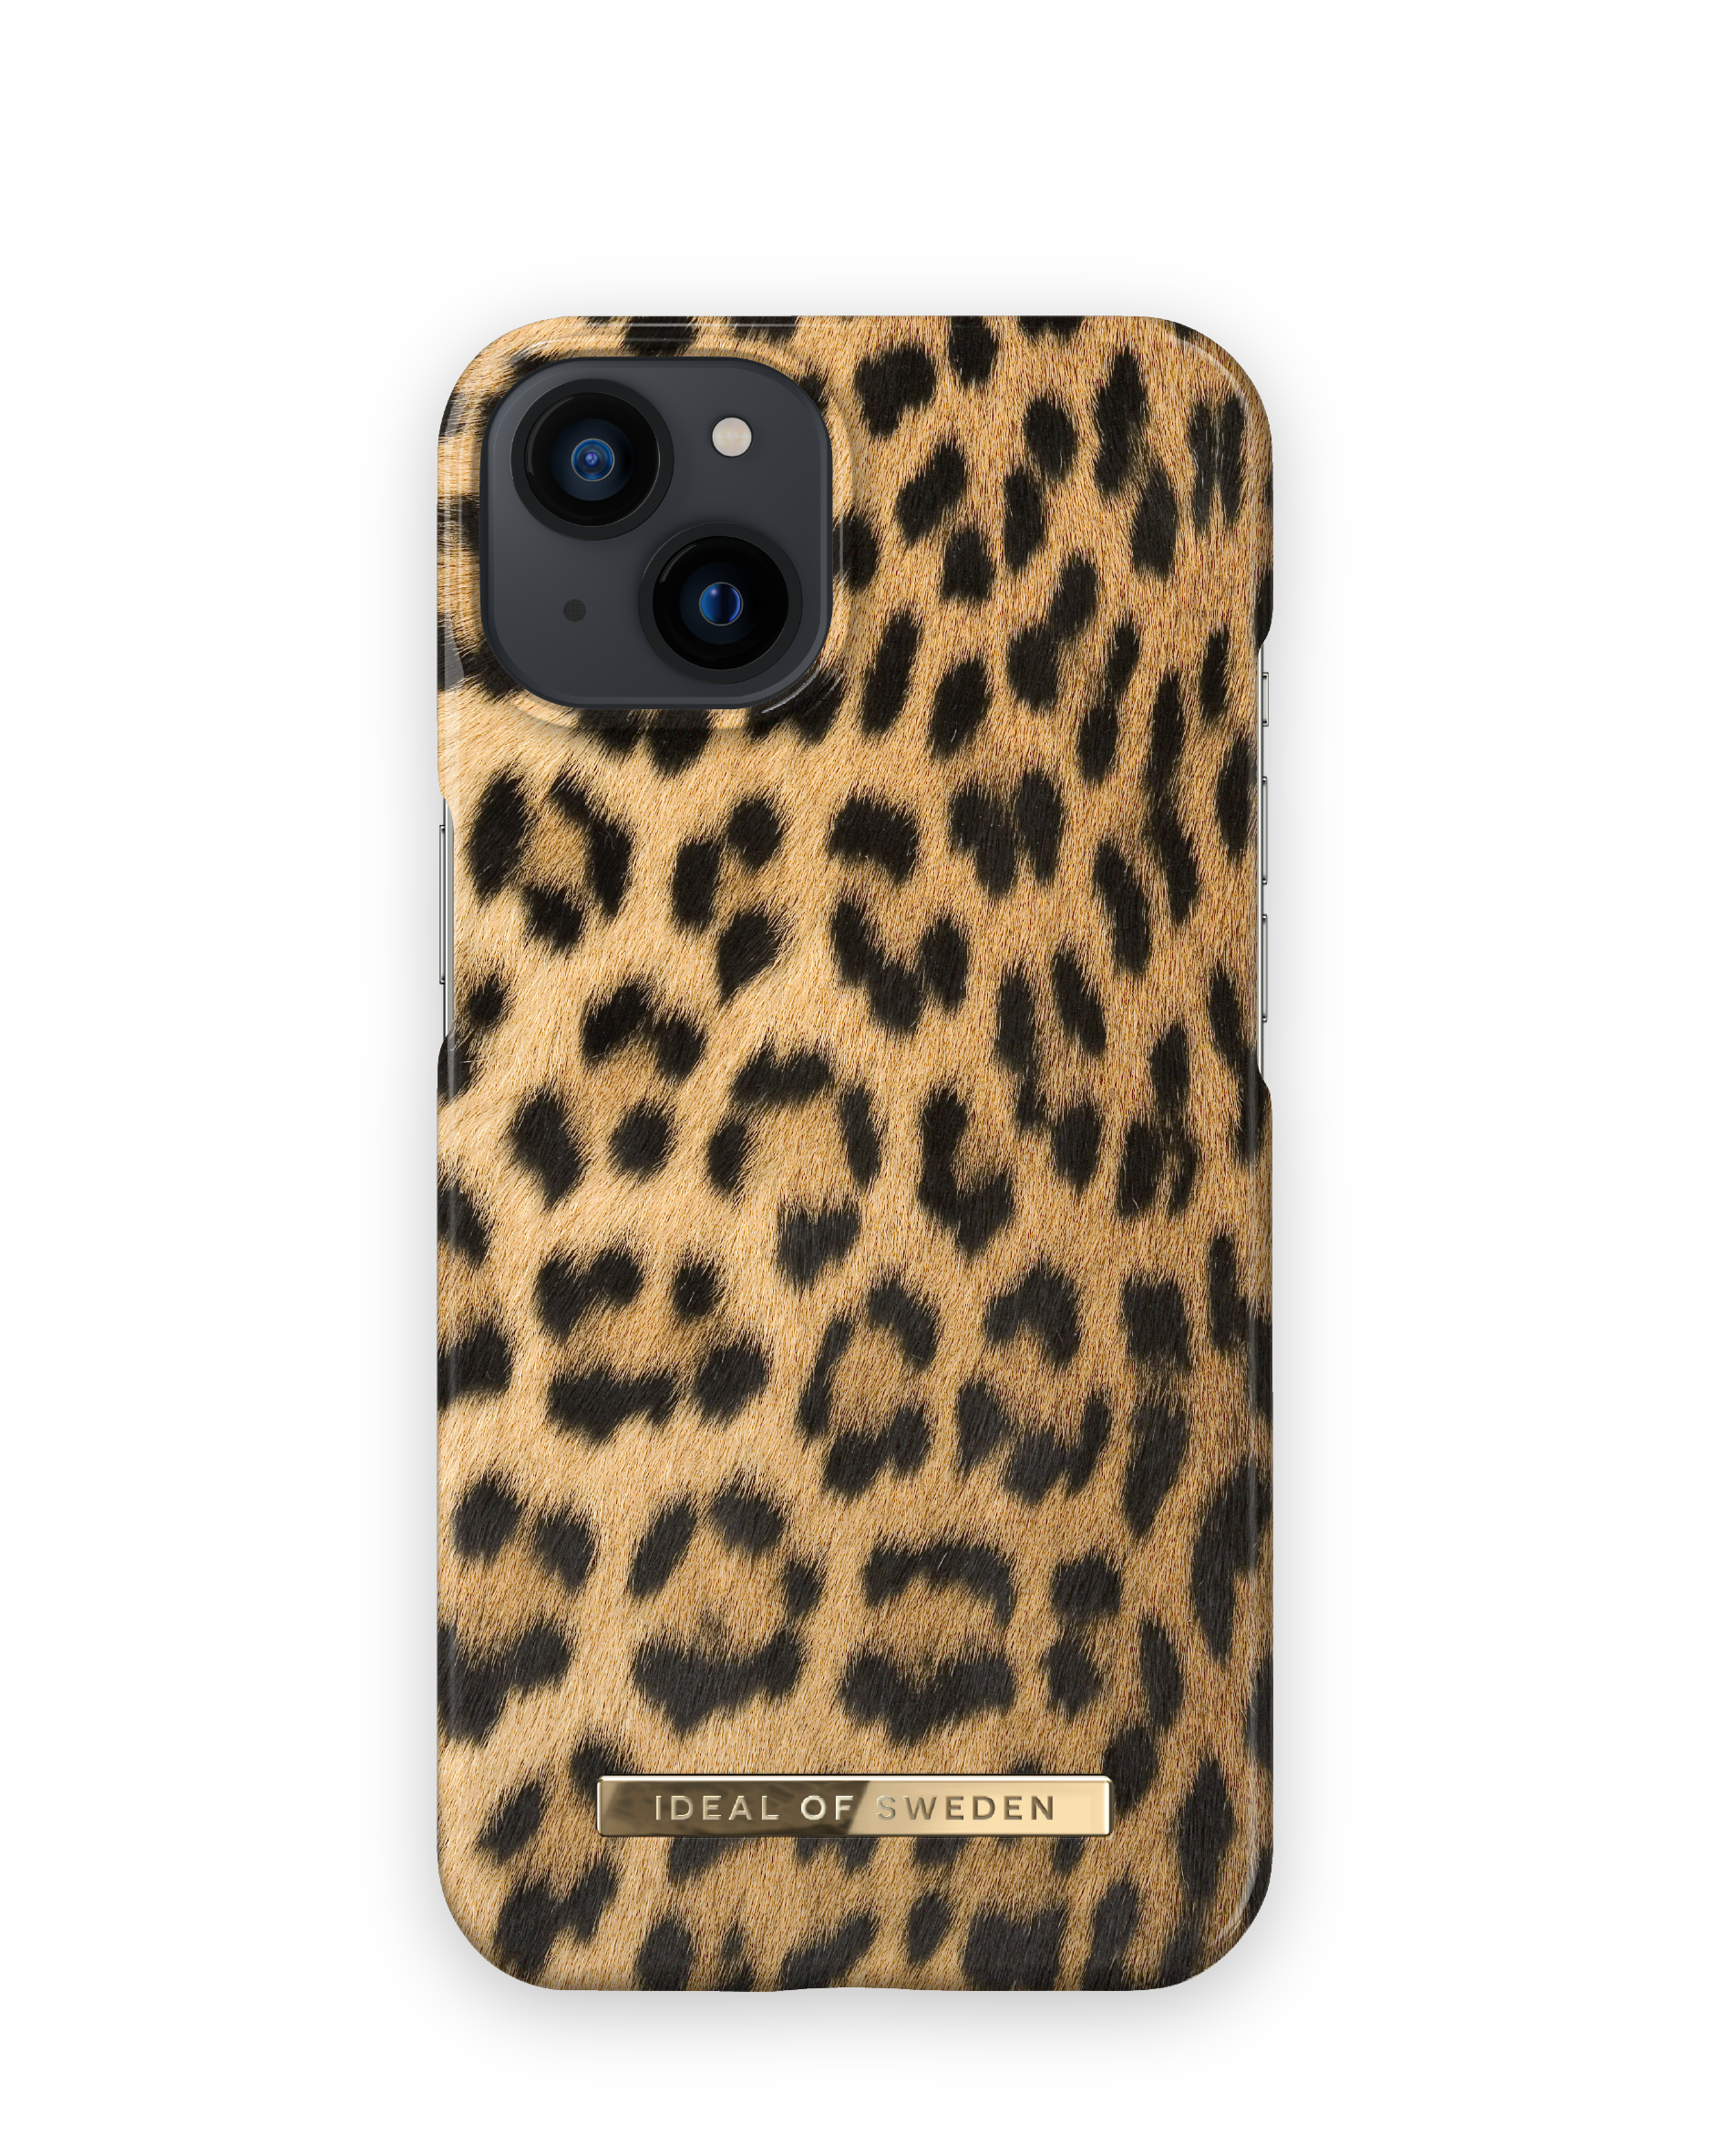 Apple, Leopard iPhone Backcover, IDEAL SWEDEN Wild OF Mini, IDFCS17-I2154-67, 13